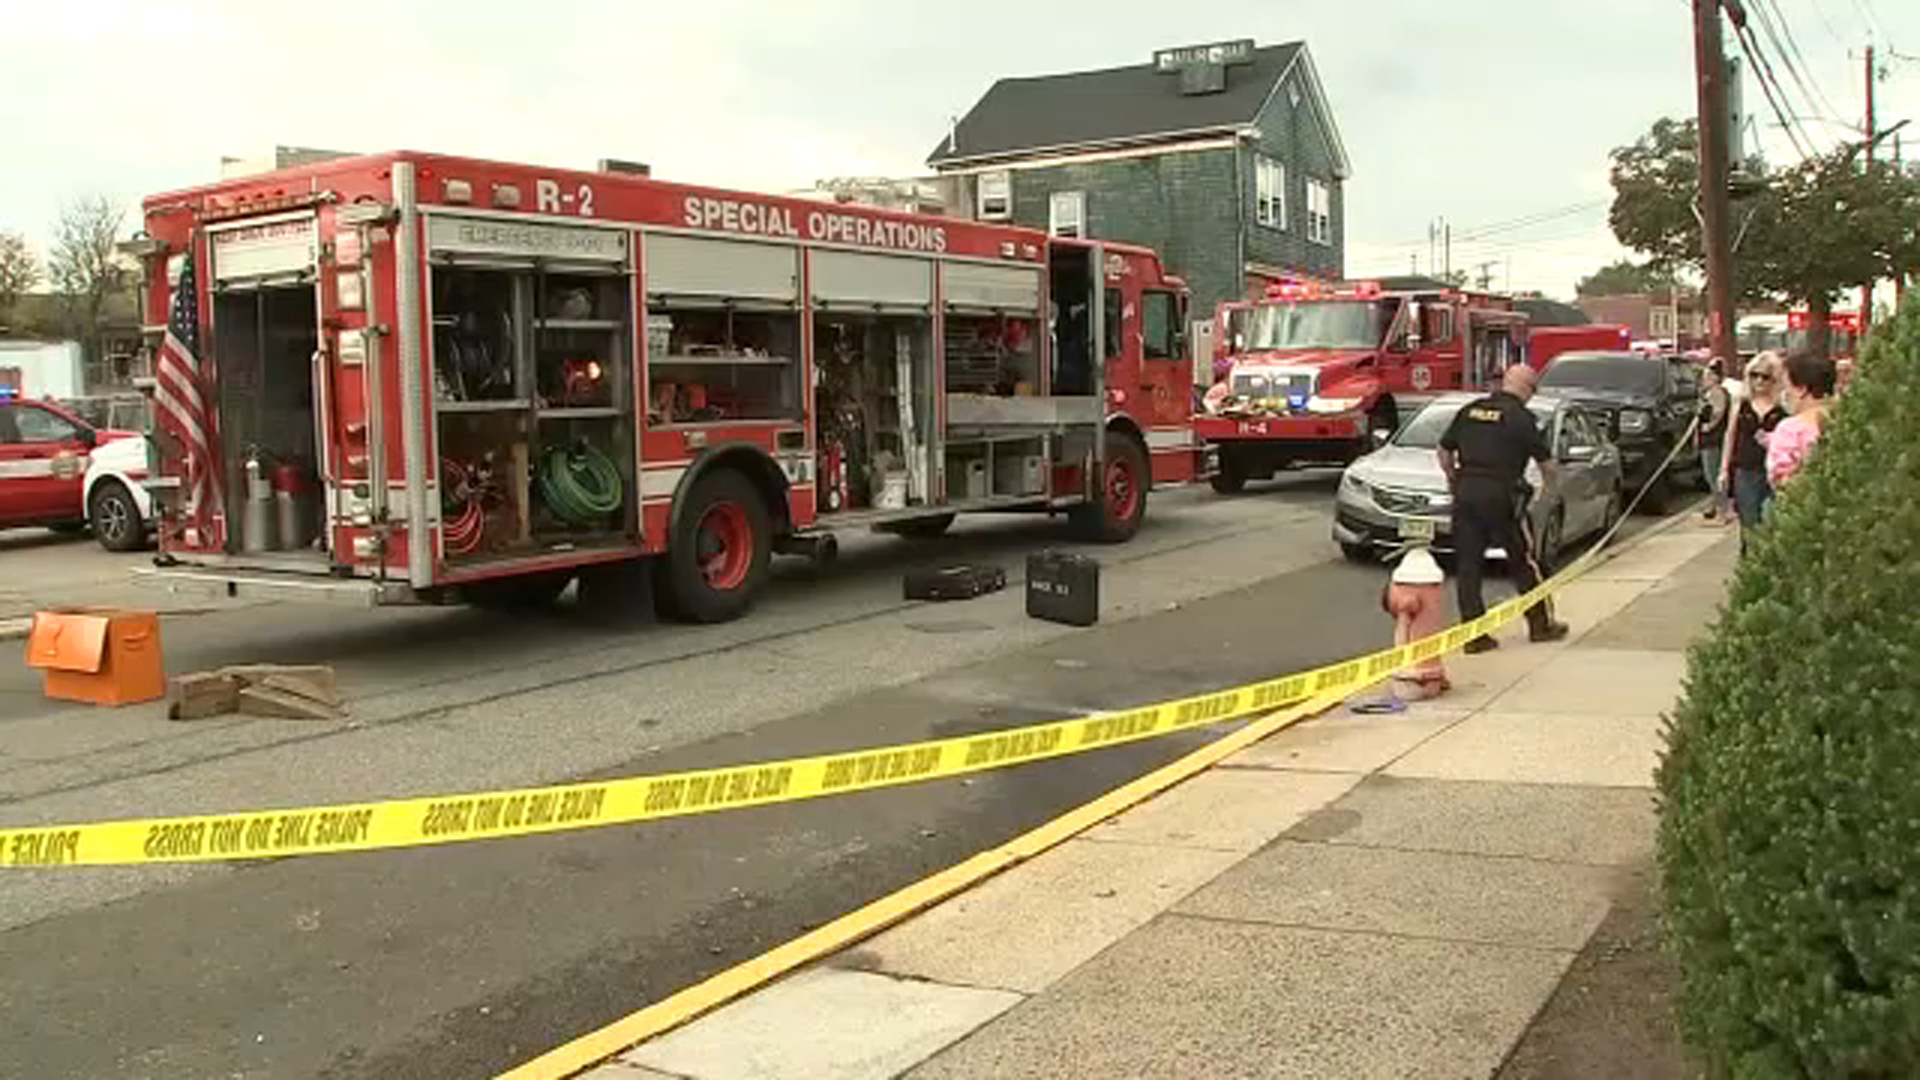 Collapse pins worker at East Rutherford, NJ construction site